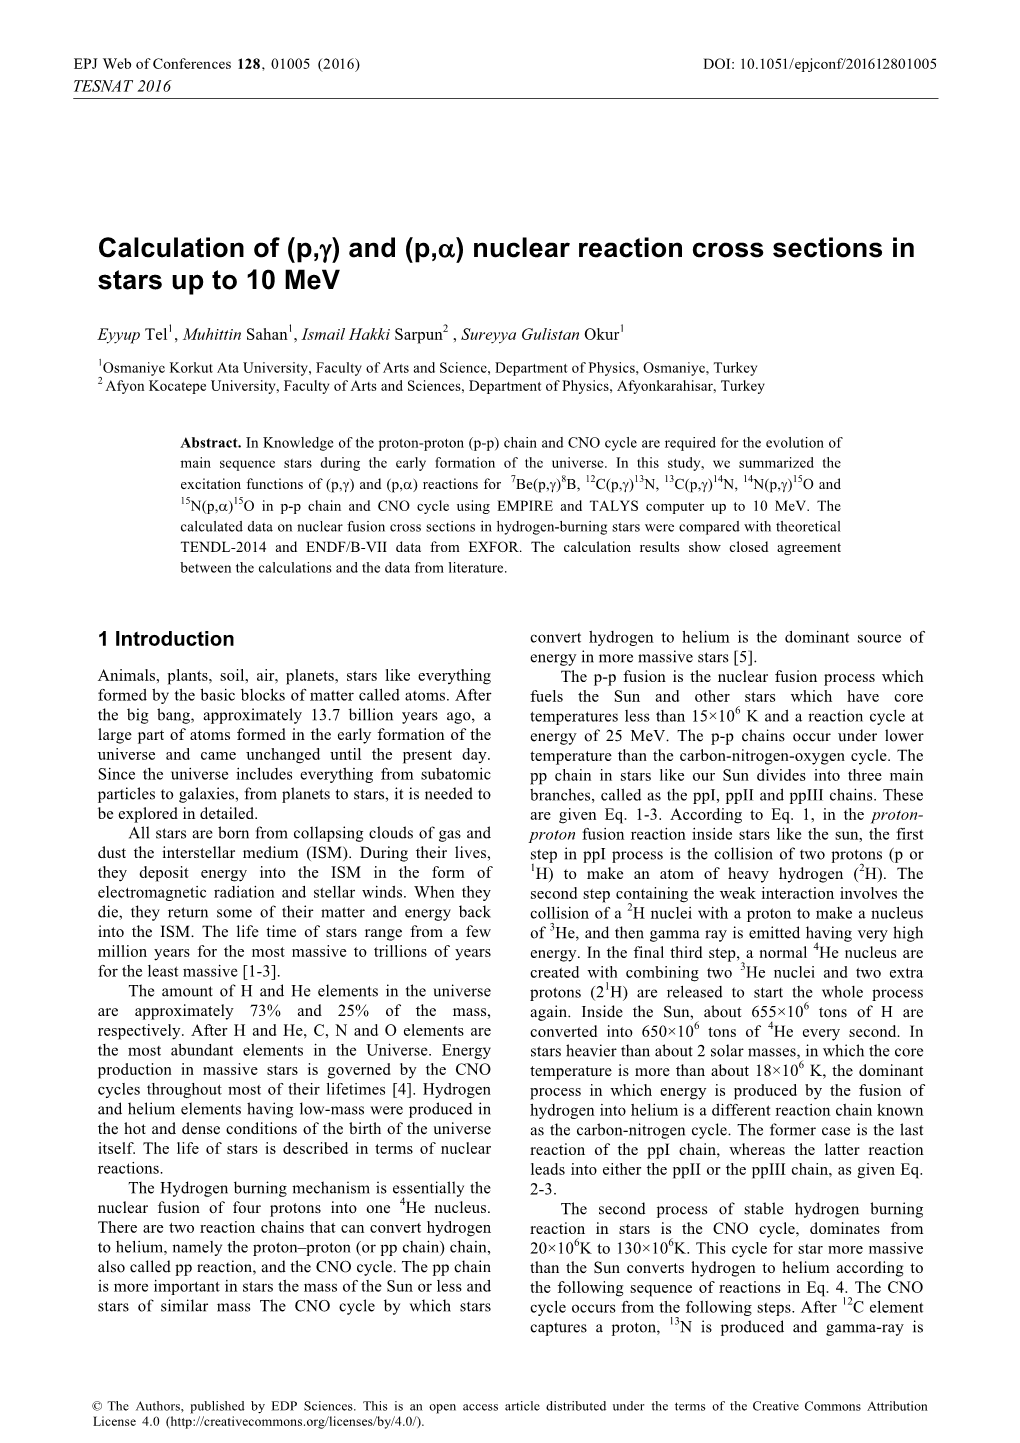 Calculation of \(P,Γ\) and \(P,Α\) Nuclear Reaction Cross Sections in Stars up to 10